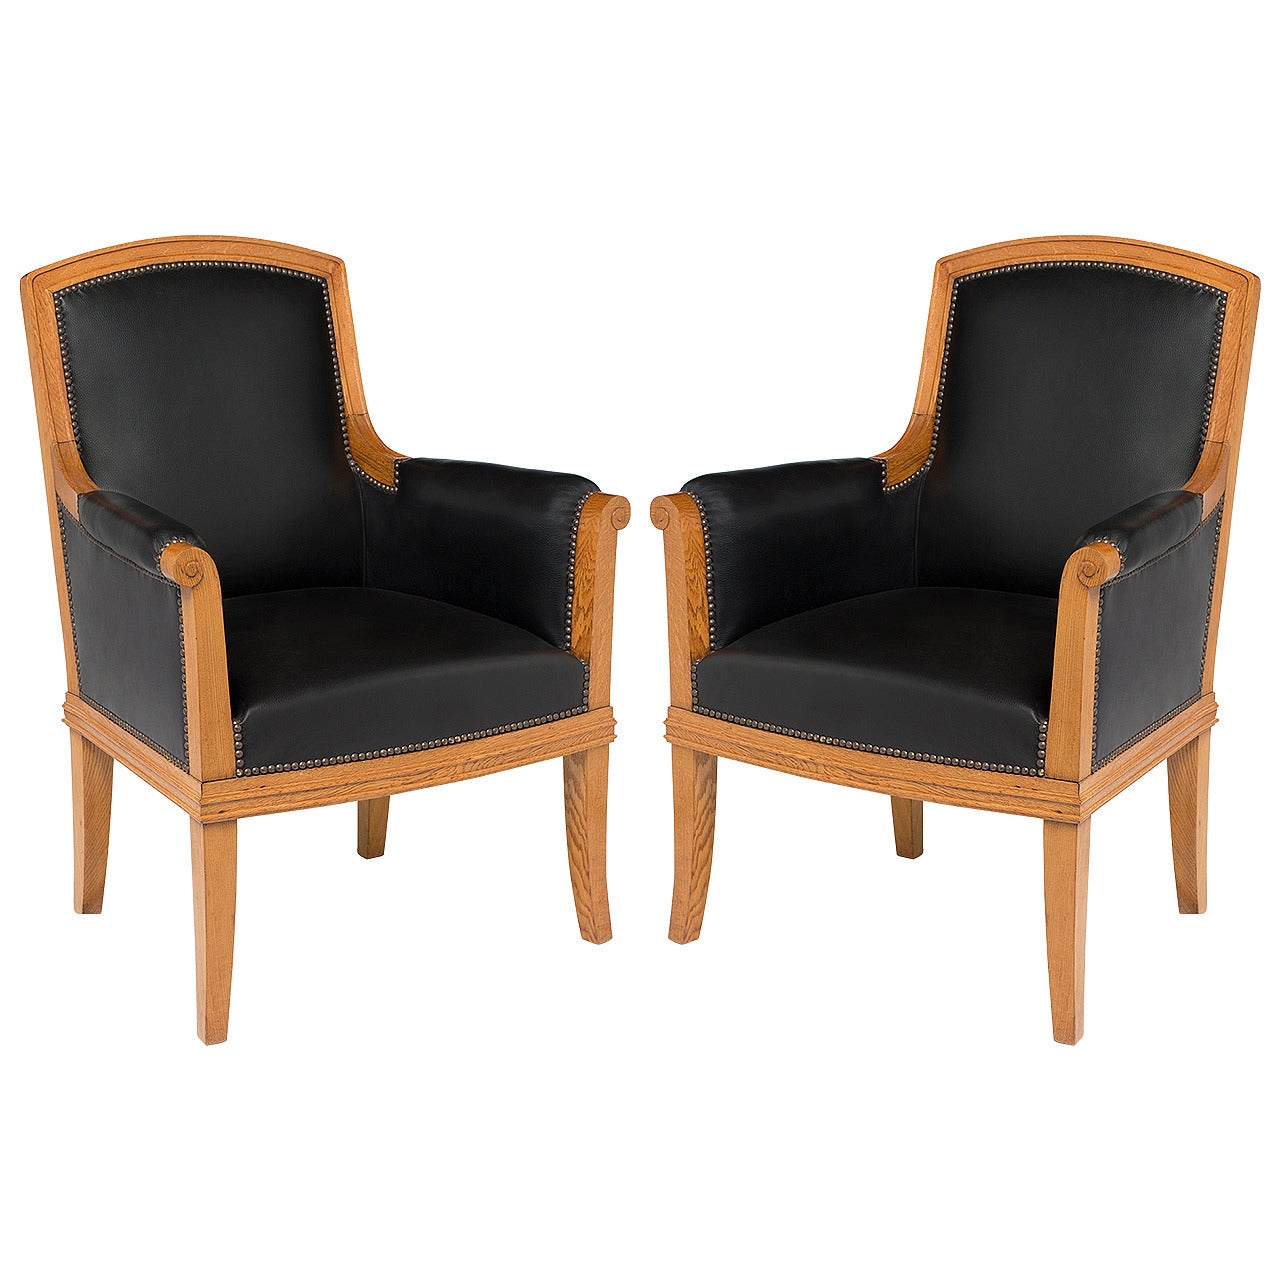 Louis Süe, Pair of Oak and Leather Armchairs, France, C. 1940 For Sale